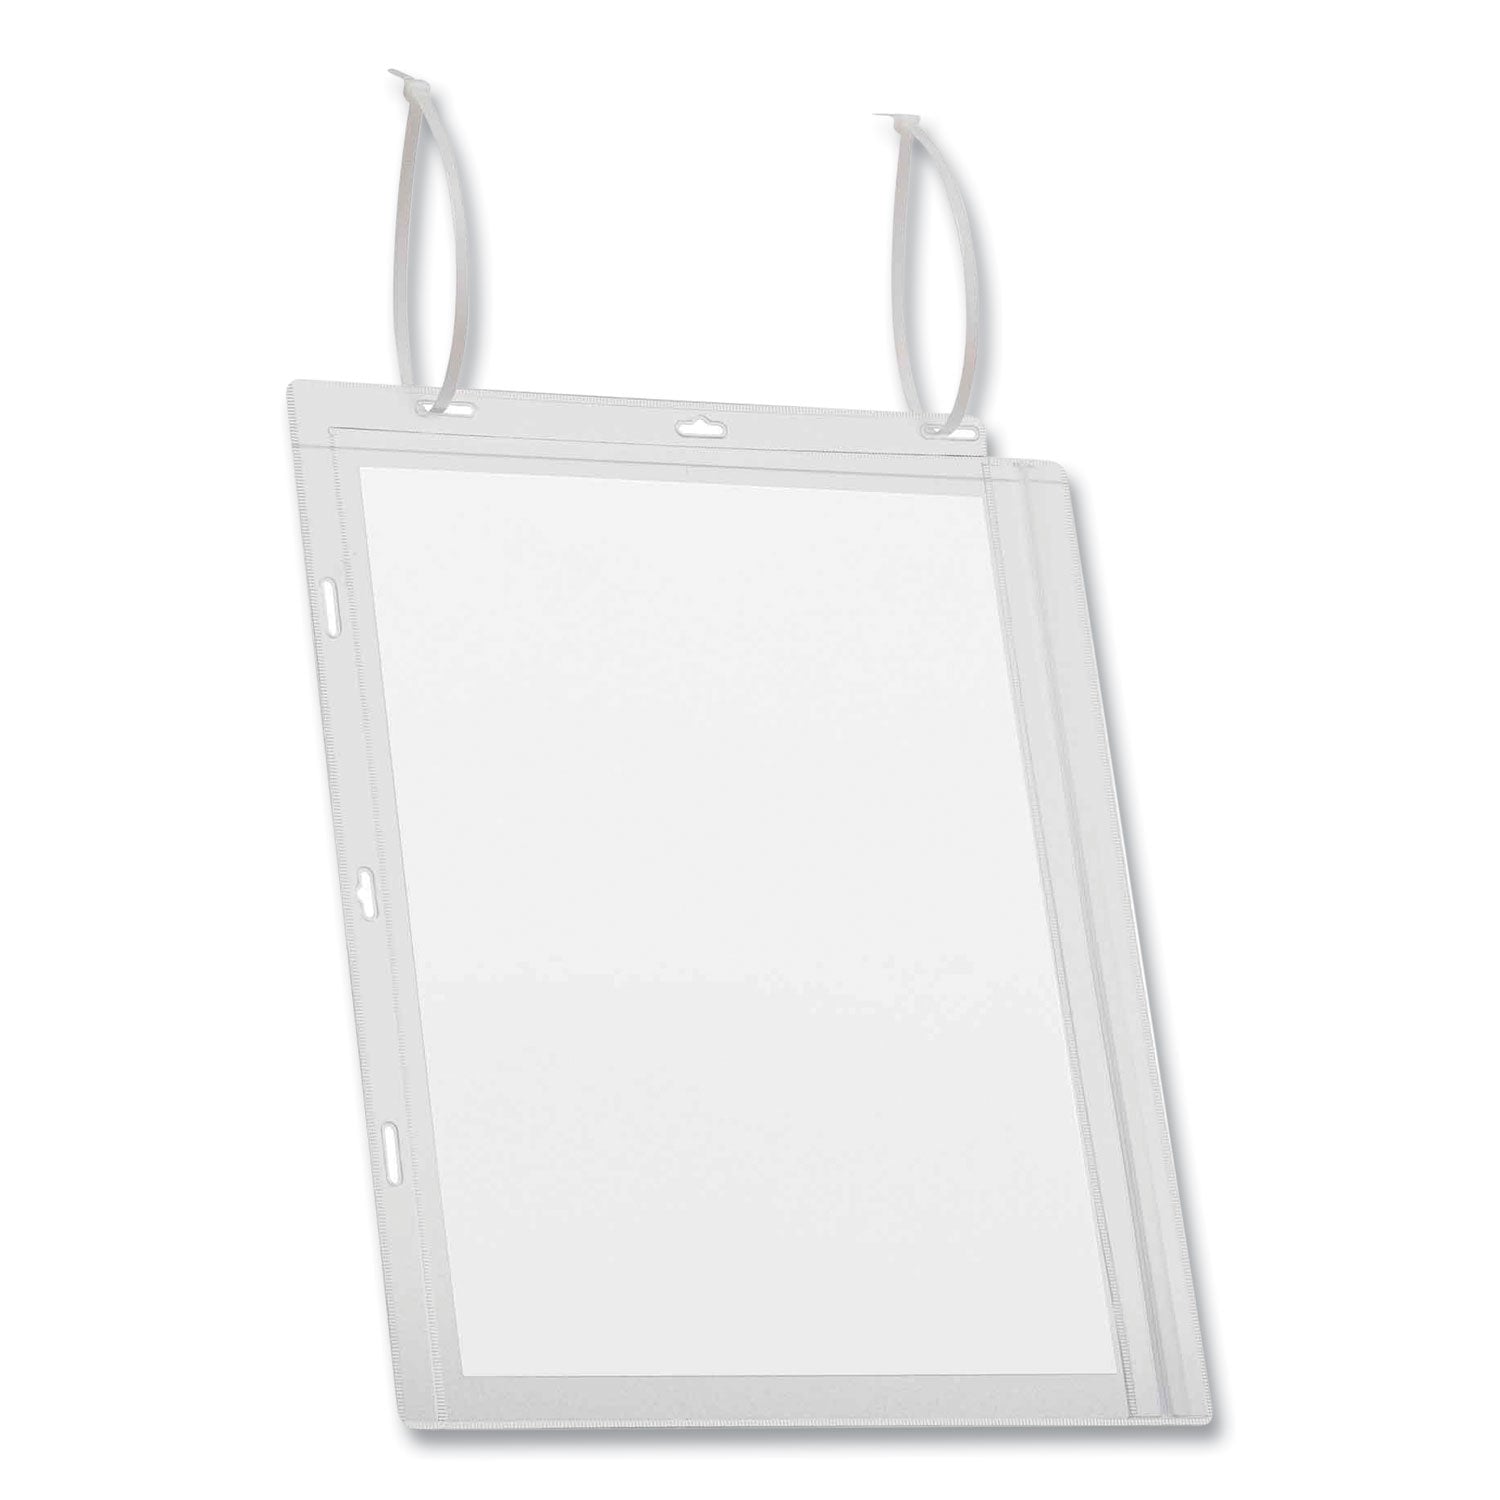 water-resistant-sign-holder-pockets-with-cable-ties-85-x-11-clear-frame-5-pack_dbl502719 - 5